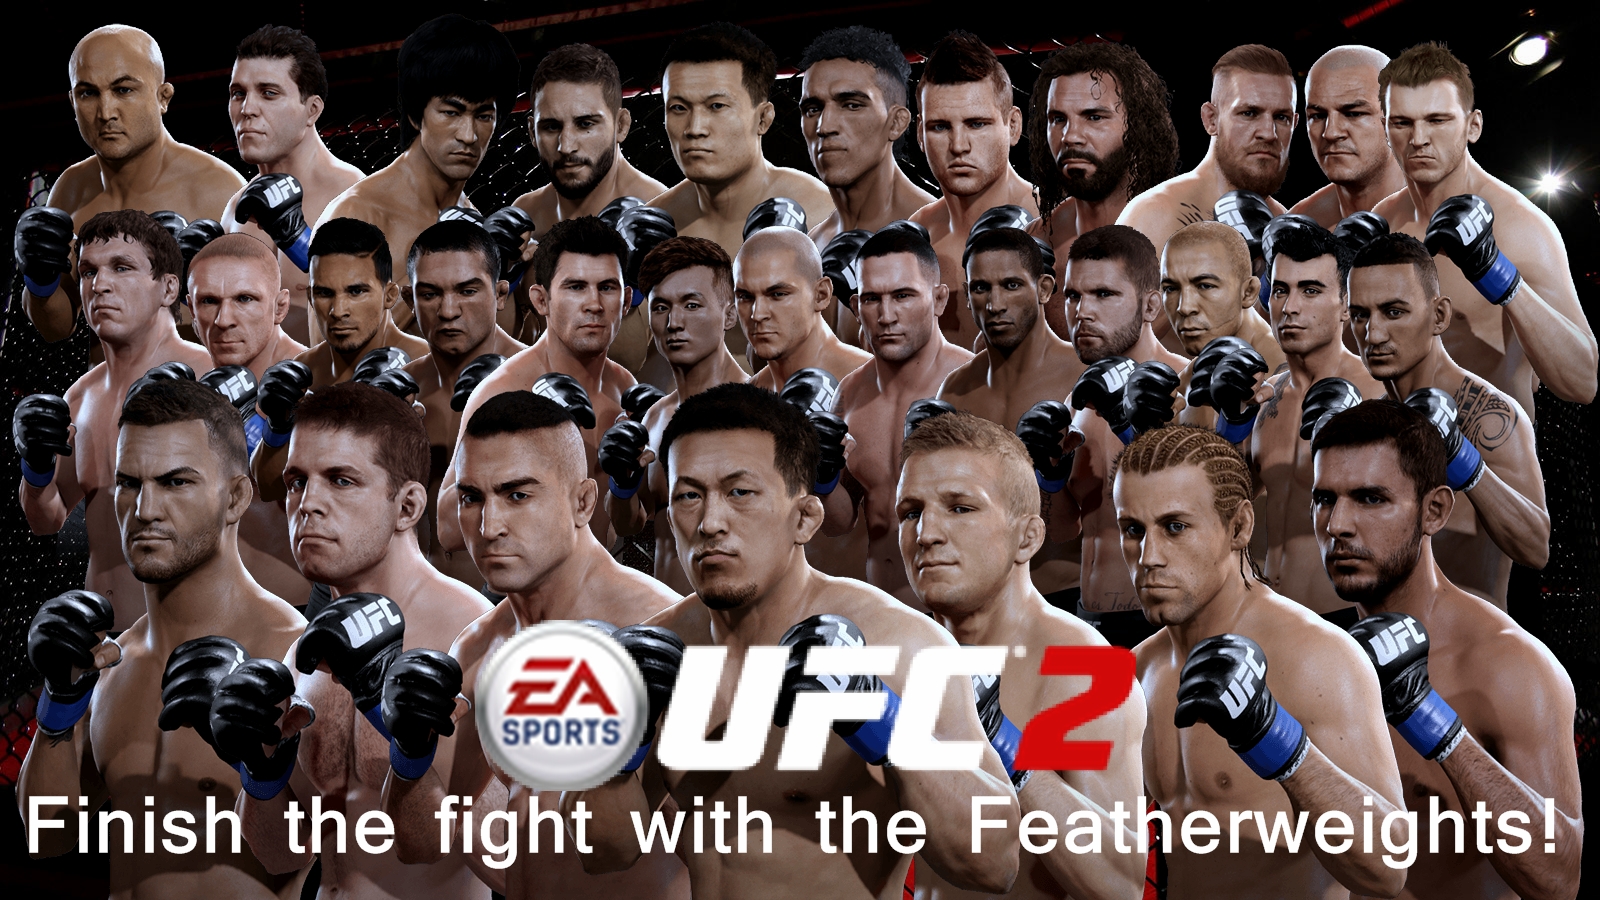 Ea Sports Ufc Featherweights Wallpaper By Yoink13 On